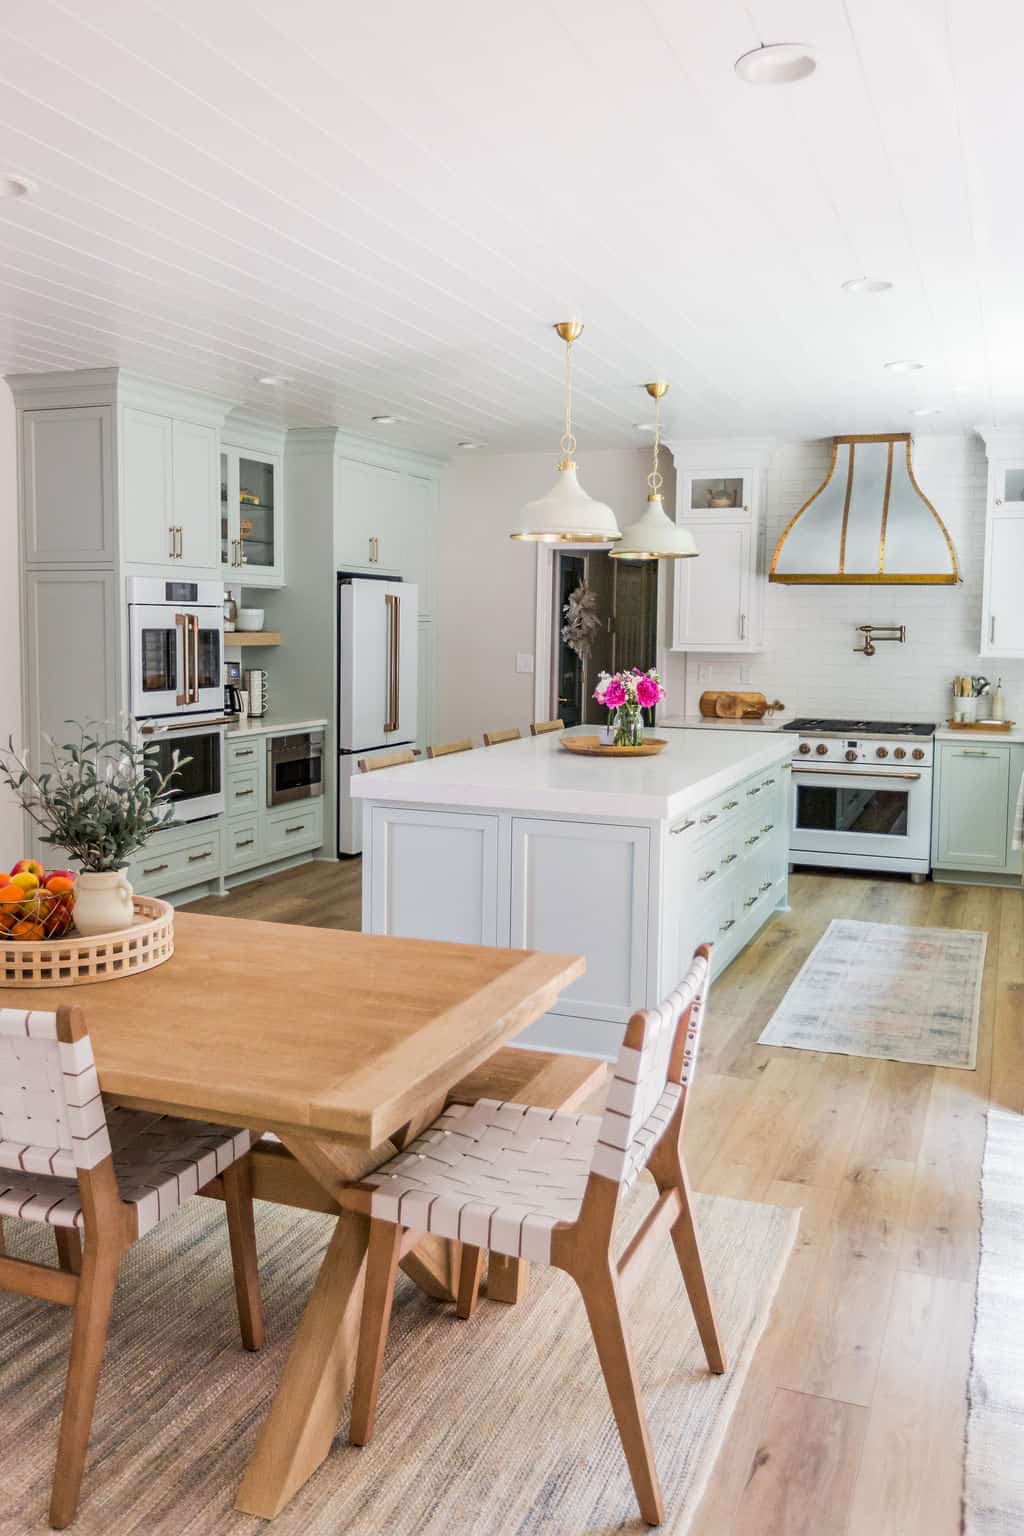 Nicholas Design Build | A bright and modern kitchen with white cabinetry, stainless steel appliances, and a central island, adorned with pendant lighting and a wooden dining table set.